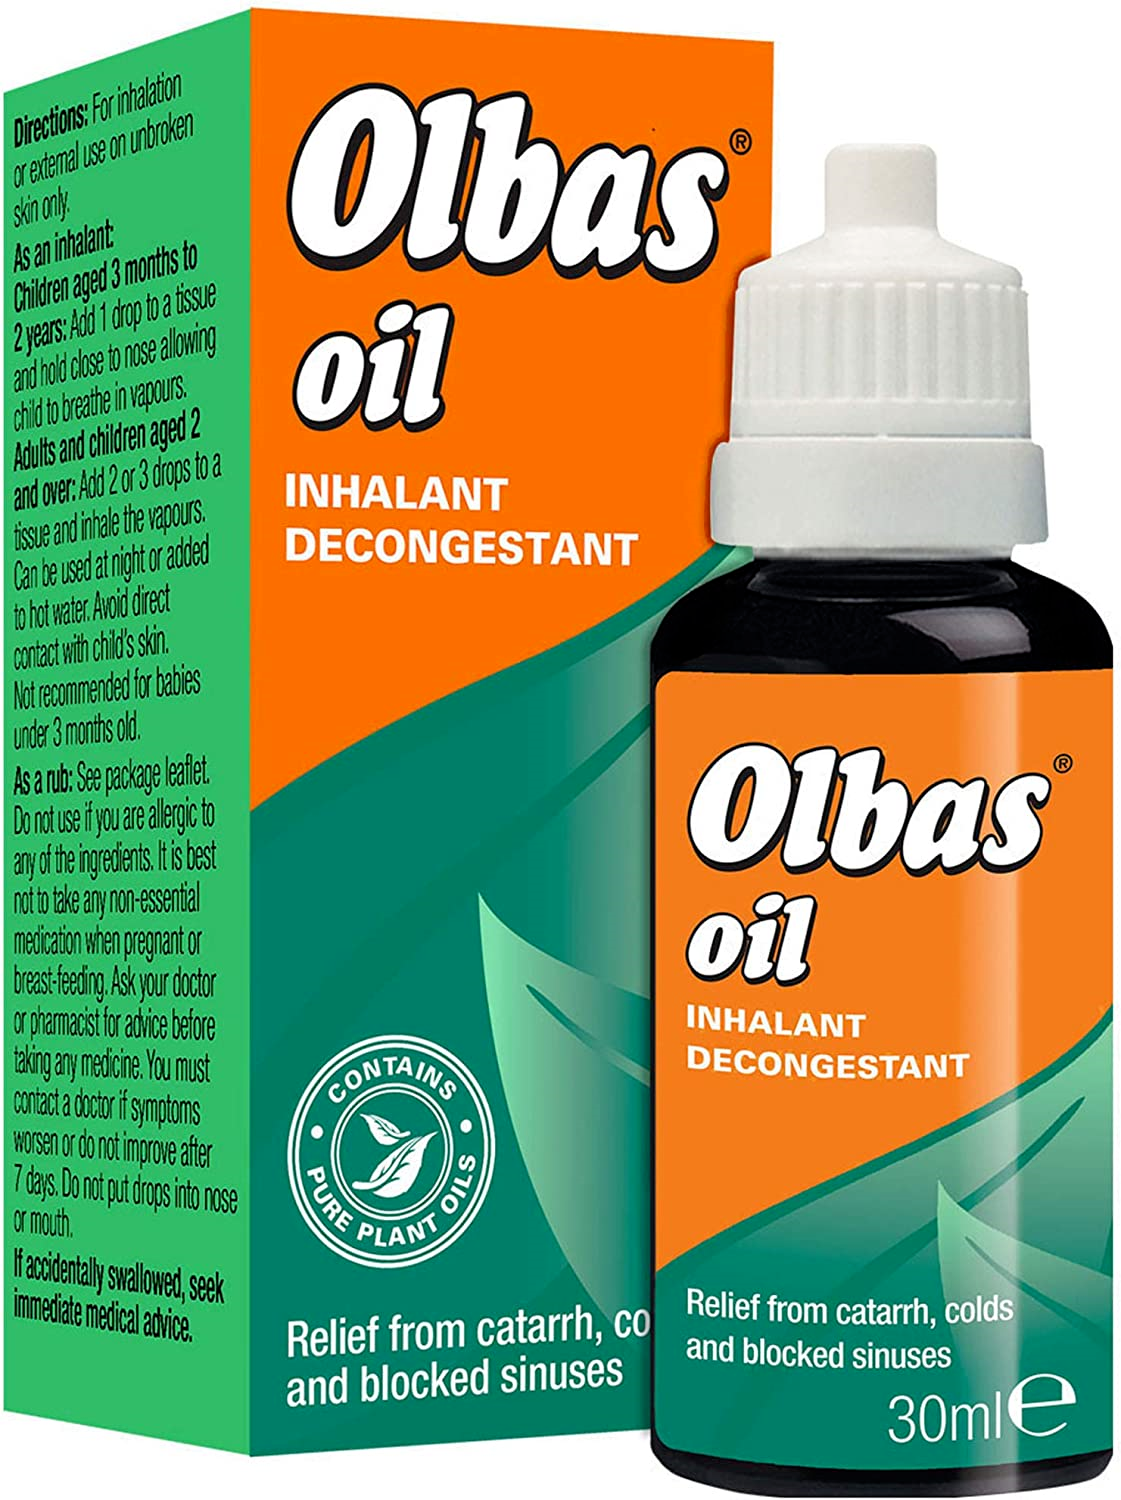 Olbas Oil 30ml - Inhalant Decongestant Oil - Relief from Catarrh, Colds